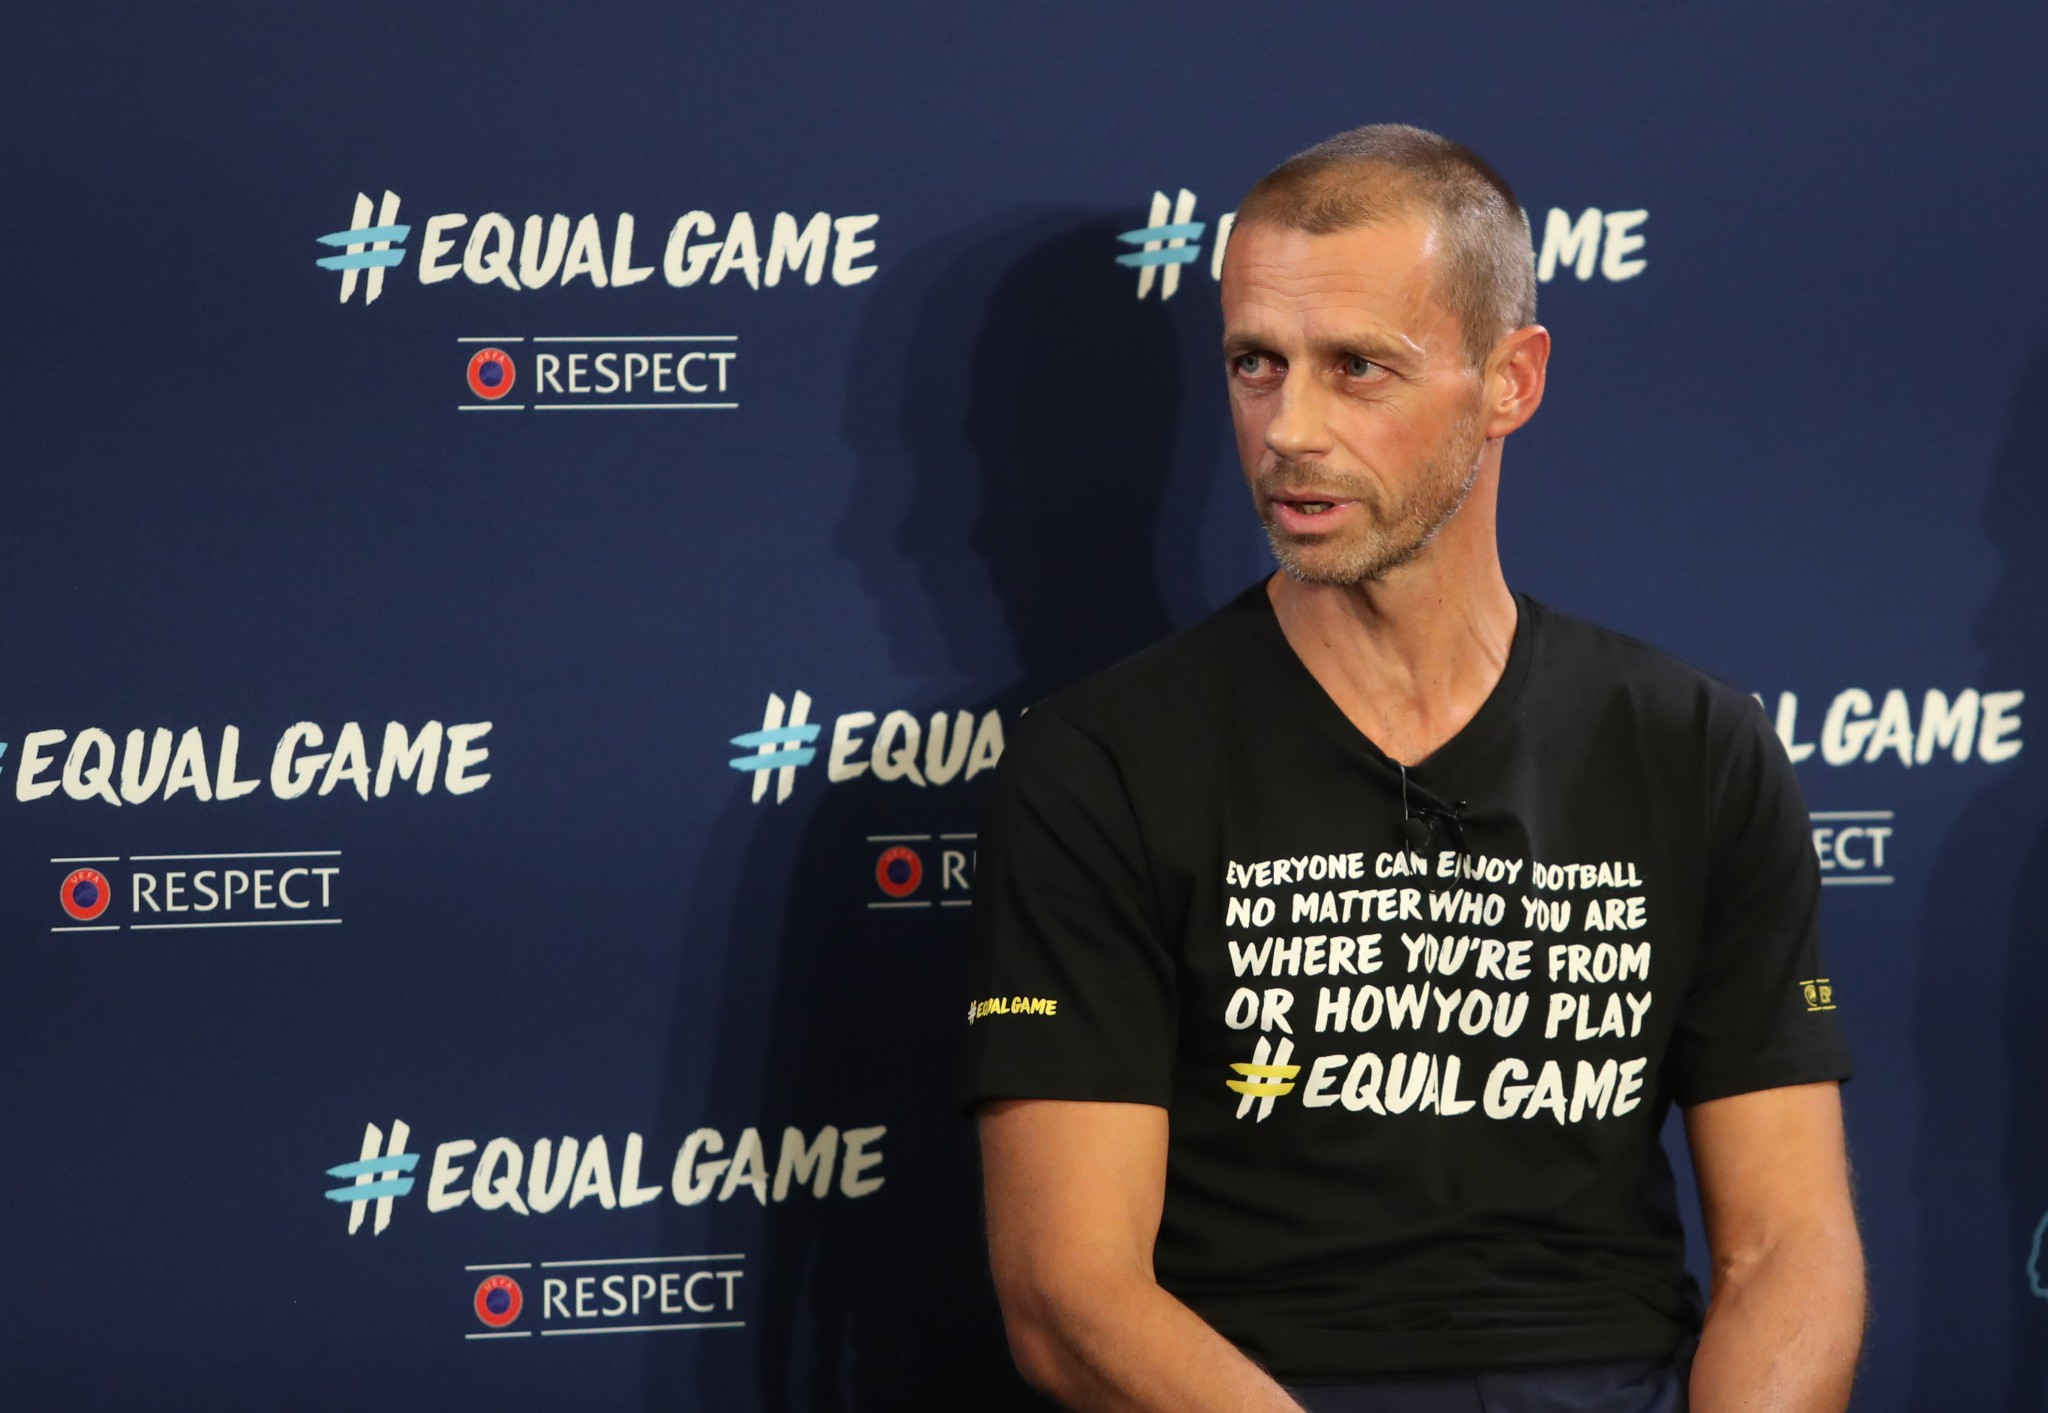 UEFA recruit global stars for respect campaign